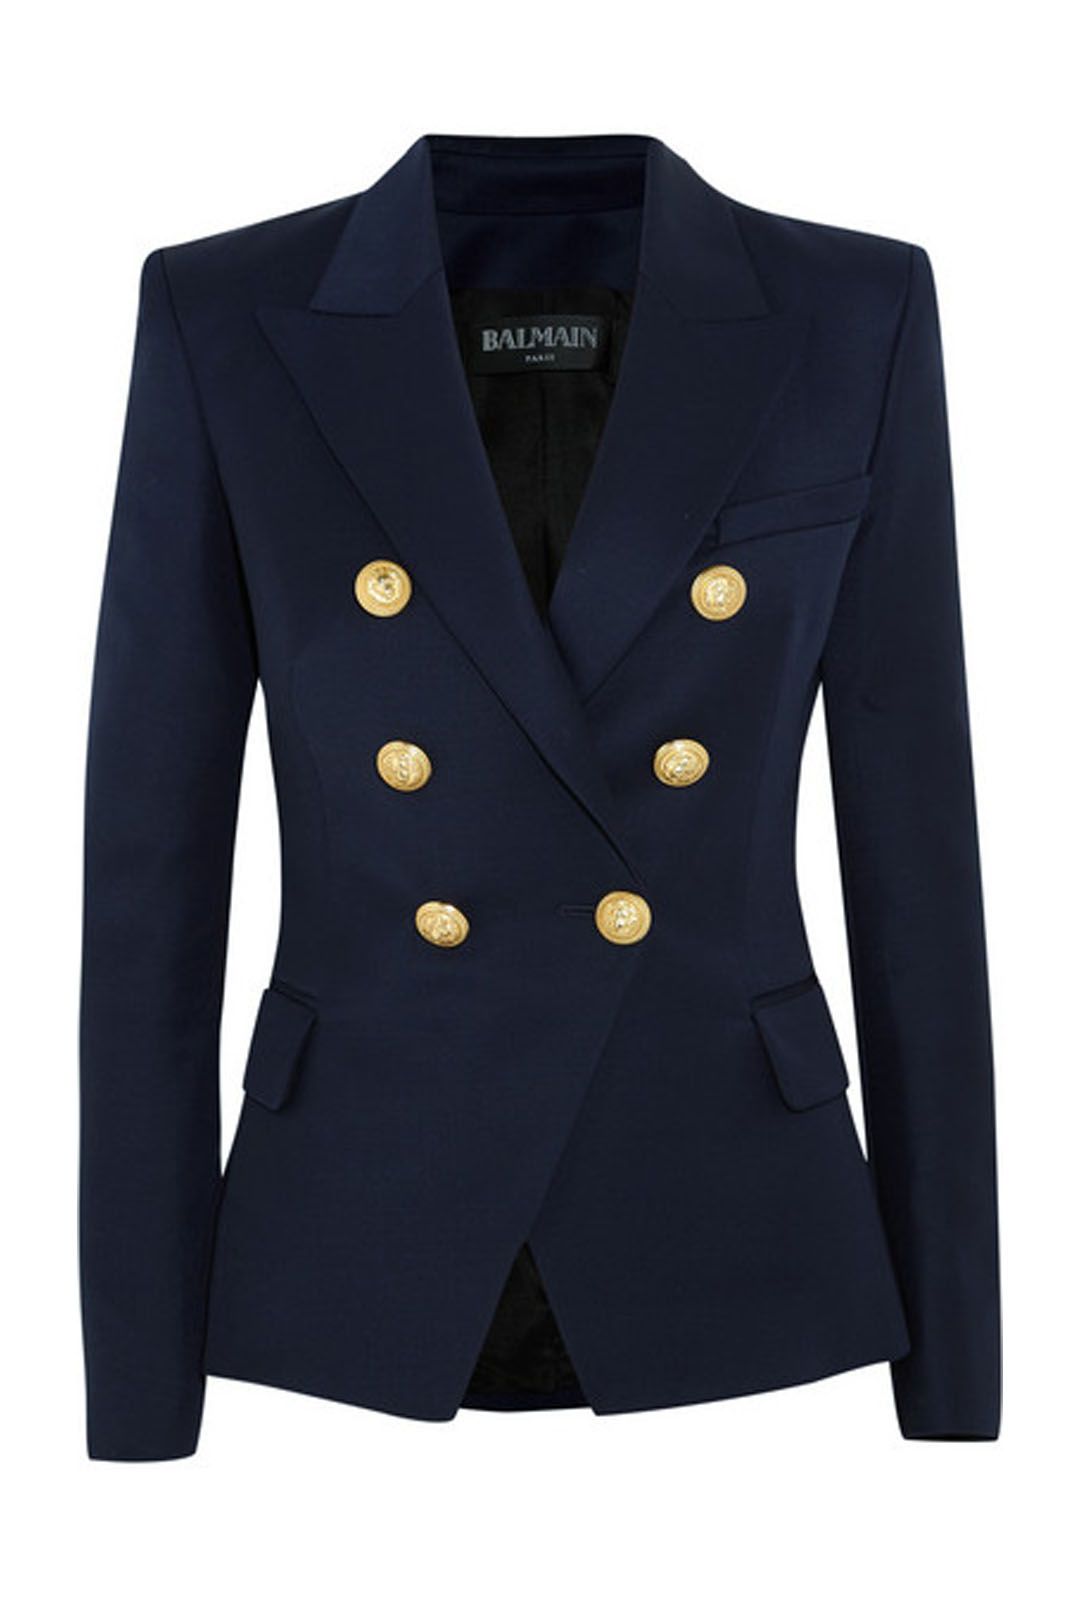 Balmain - Double-Breasted Wool-Twill Blazer - Front